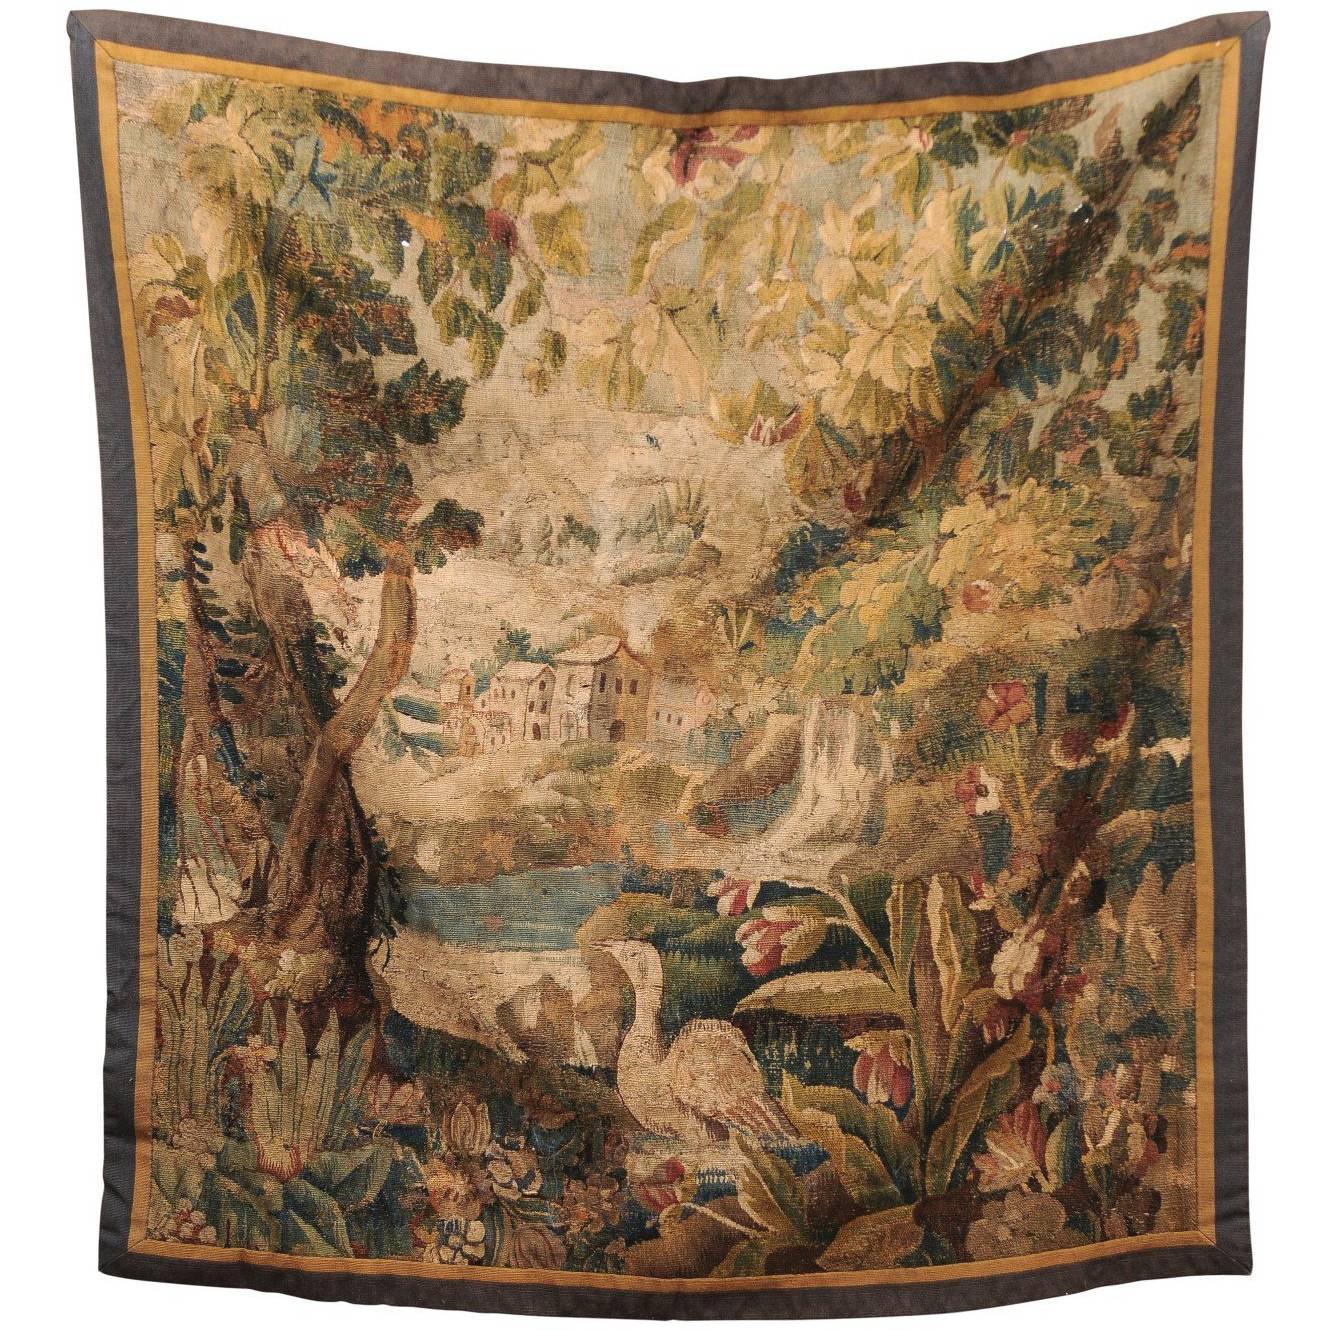 18th Century French Aubusson Tapestry of Village through the Trees